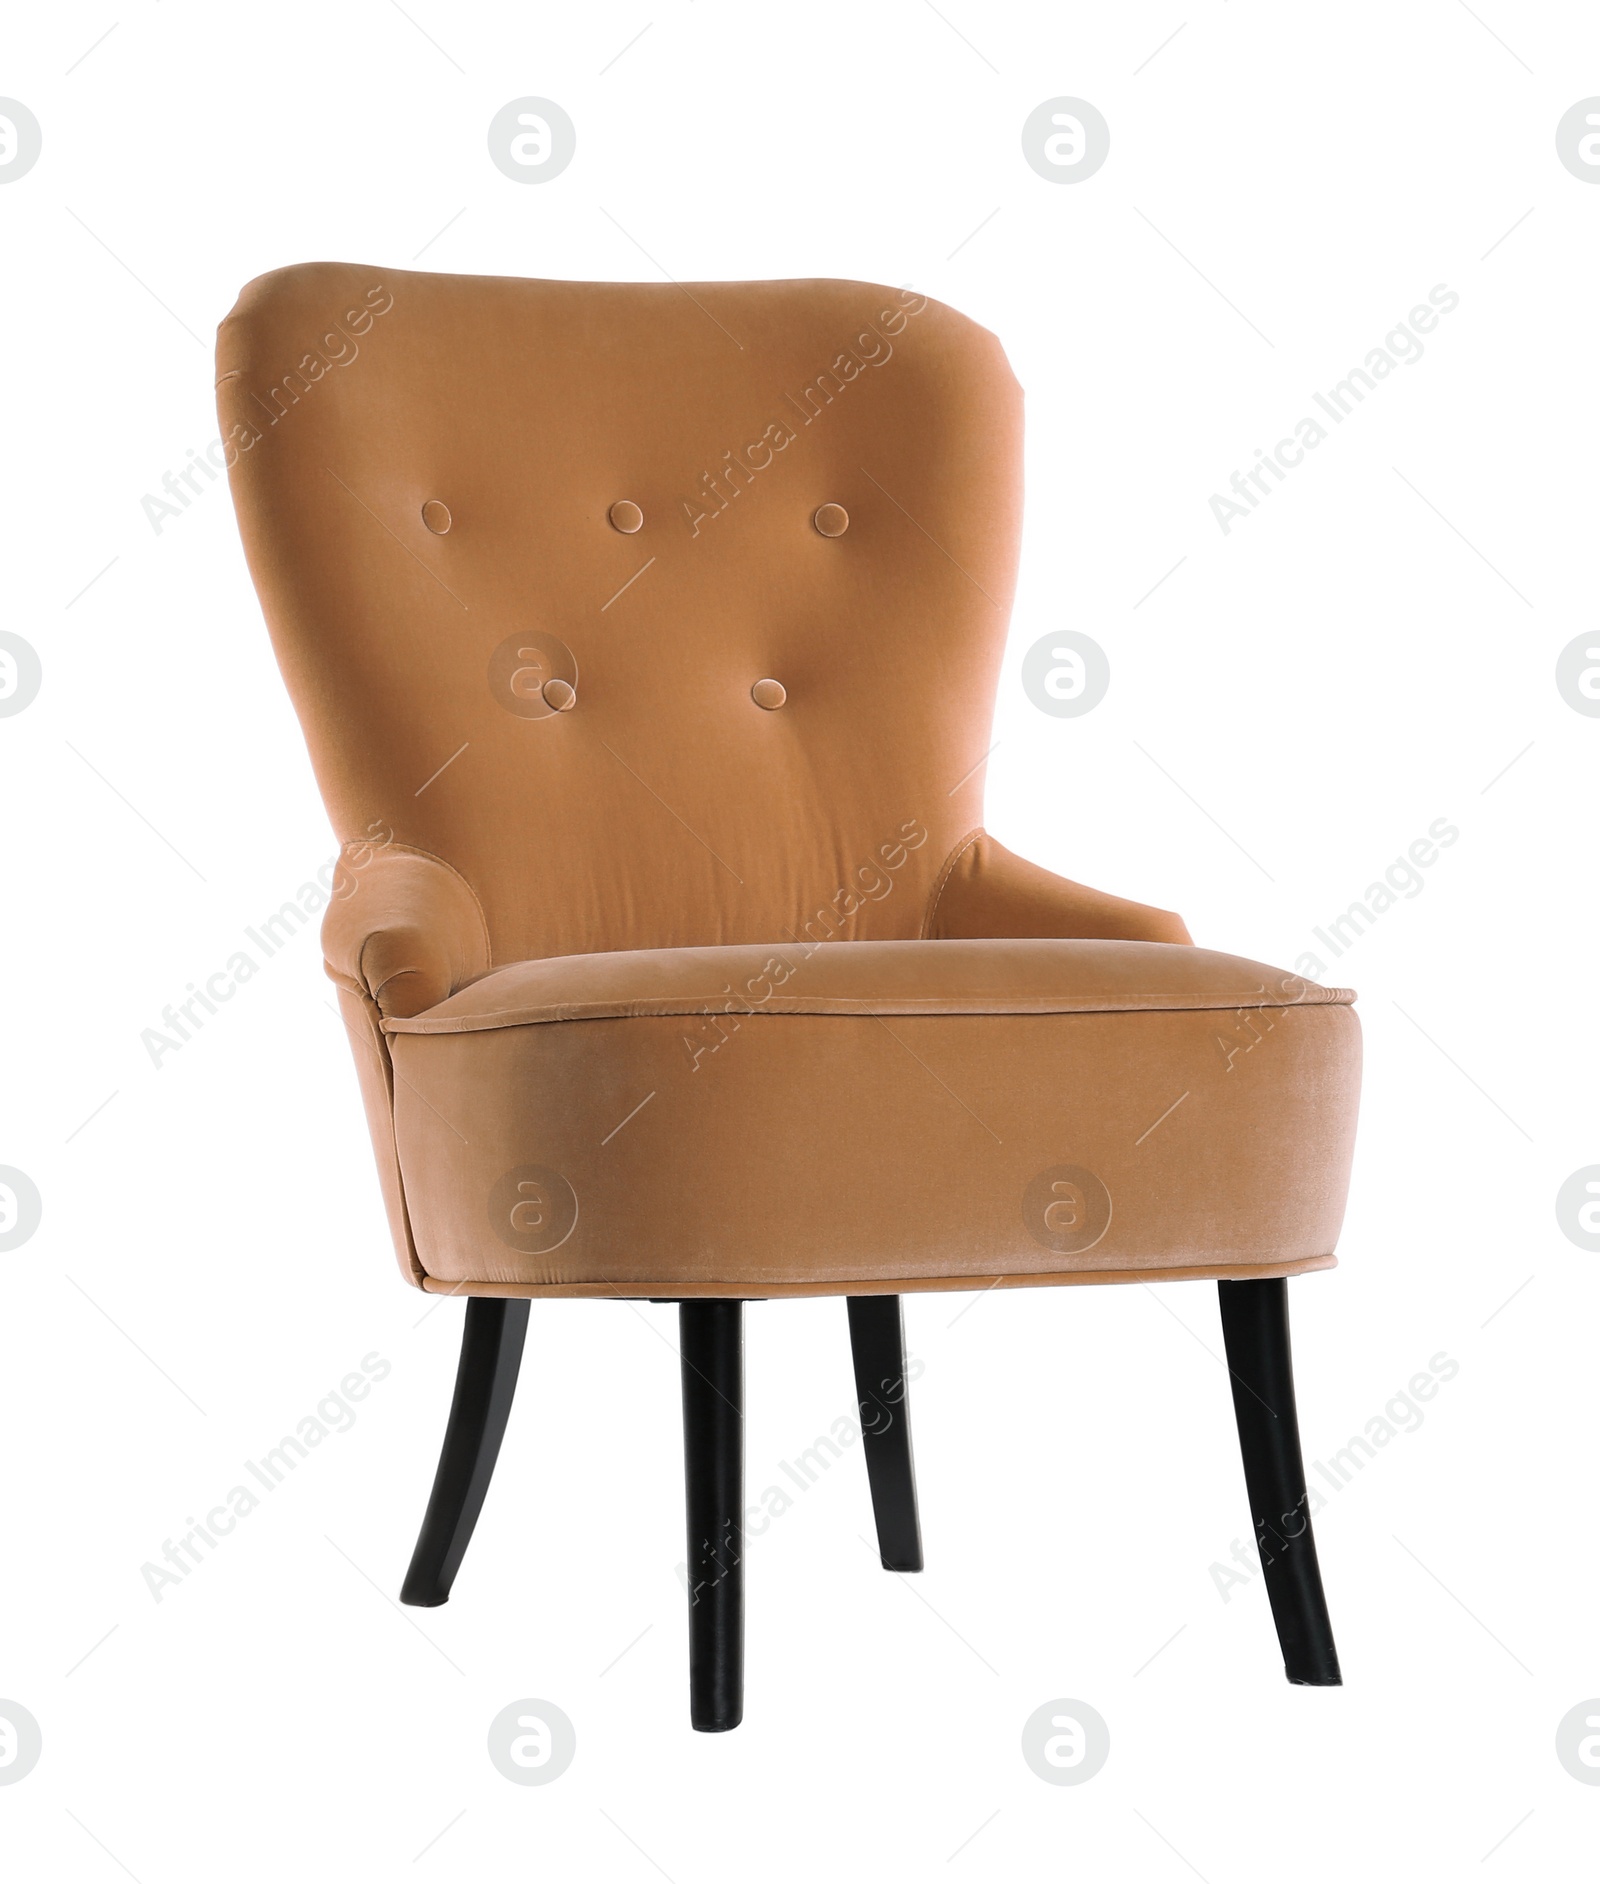 Image of One comfortable orange armchair isolated on white